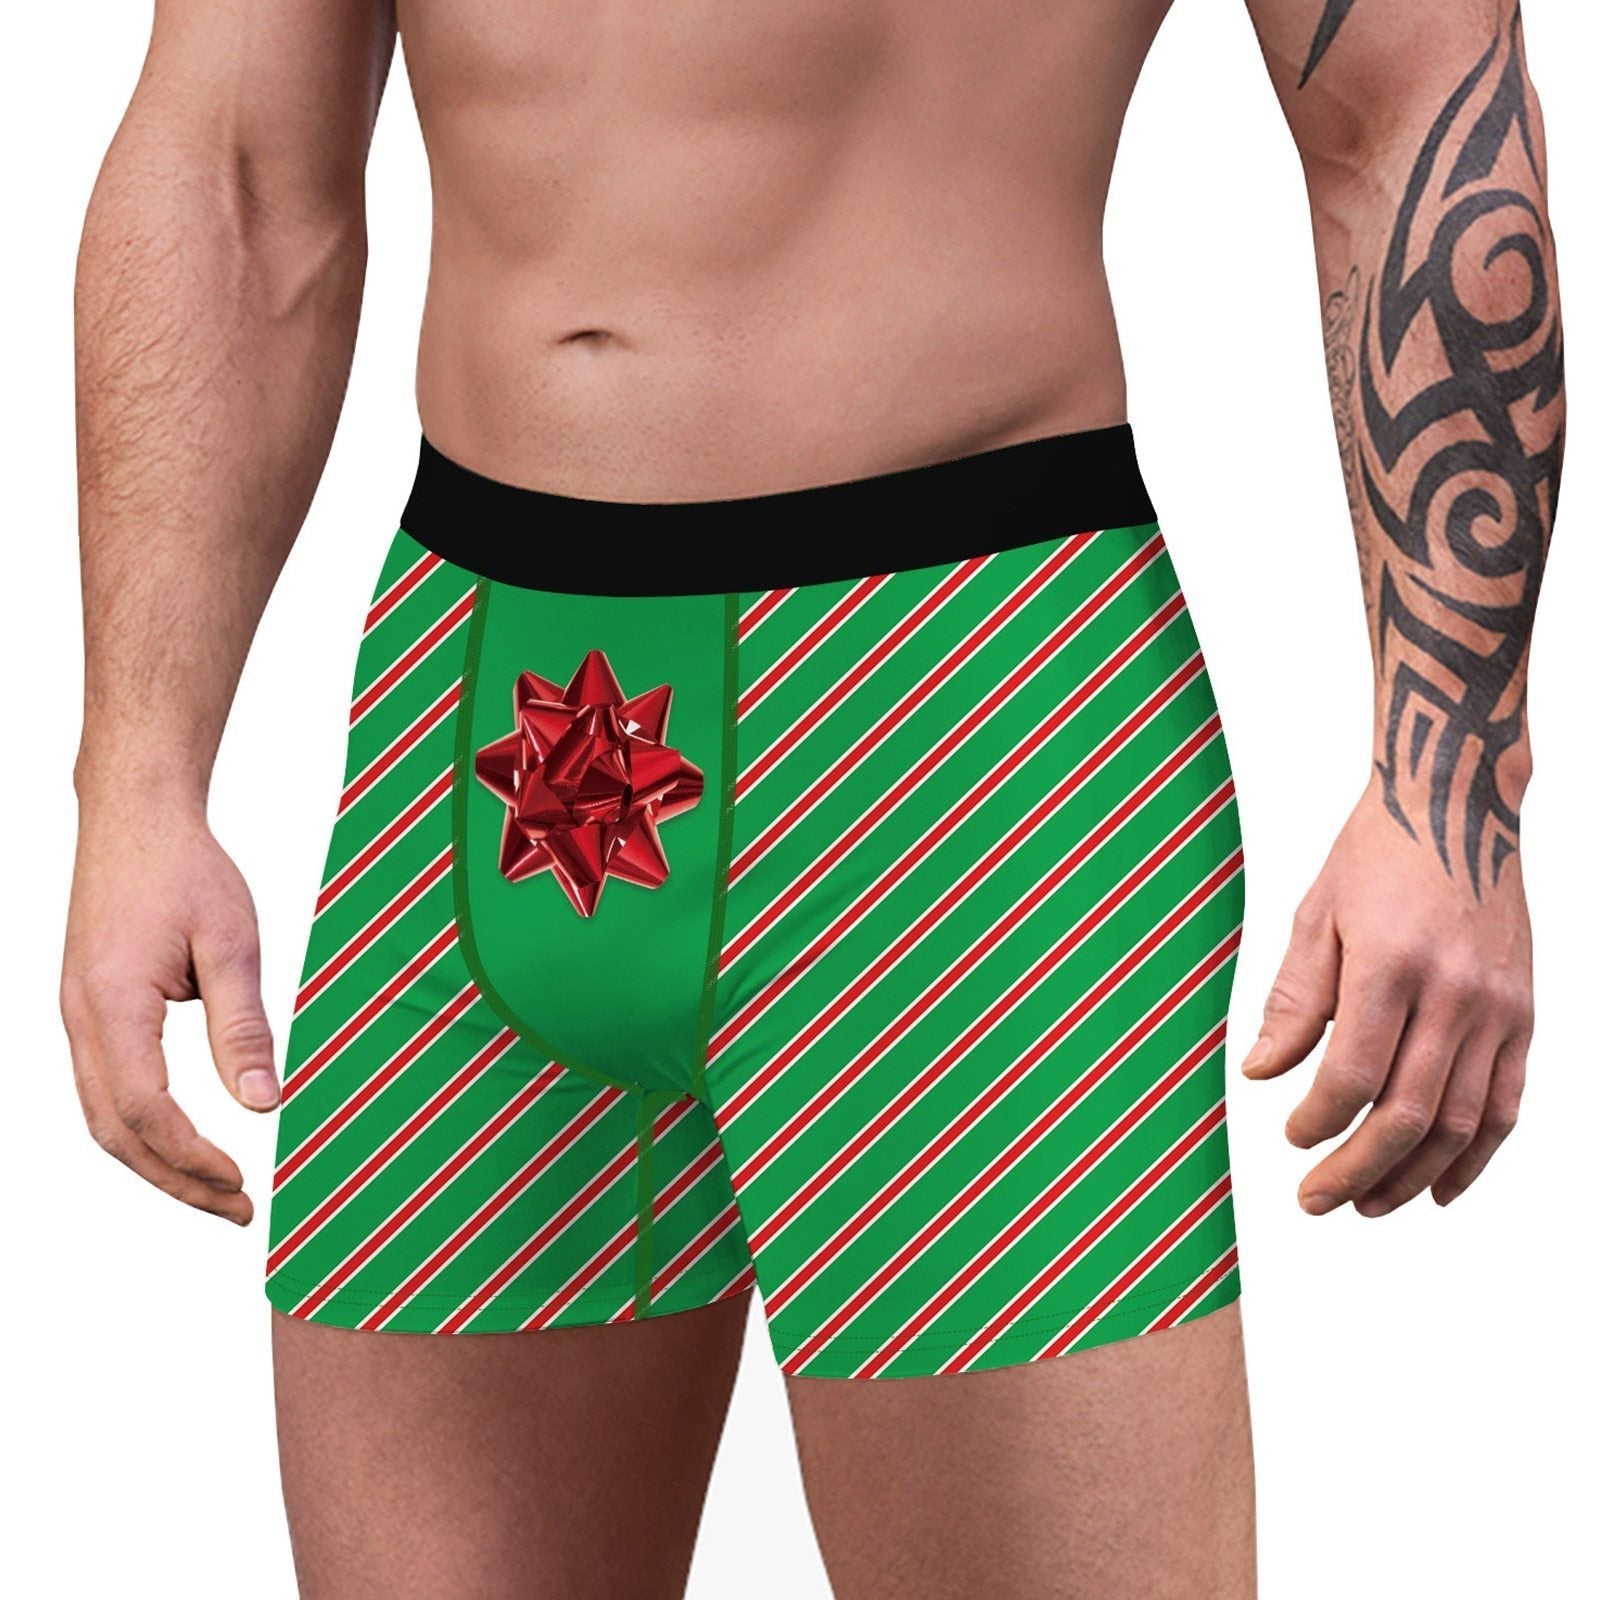 SALE - XMAS GIFT - Mens Christmas Boxer Shorts Printed Gift Wrap with Bow